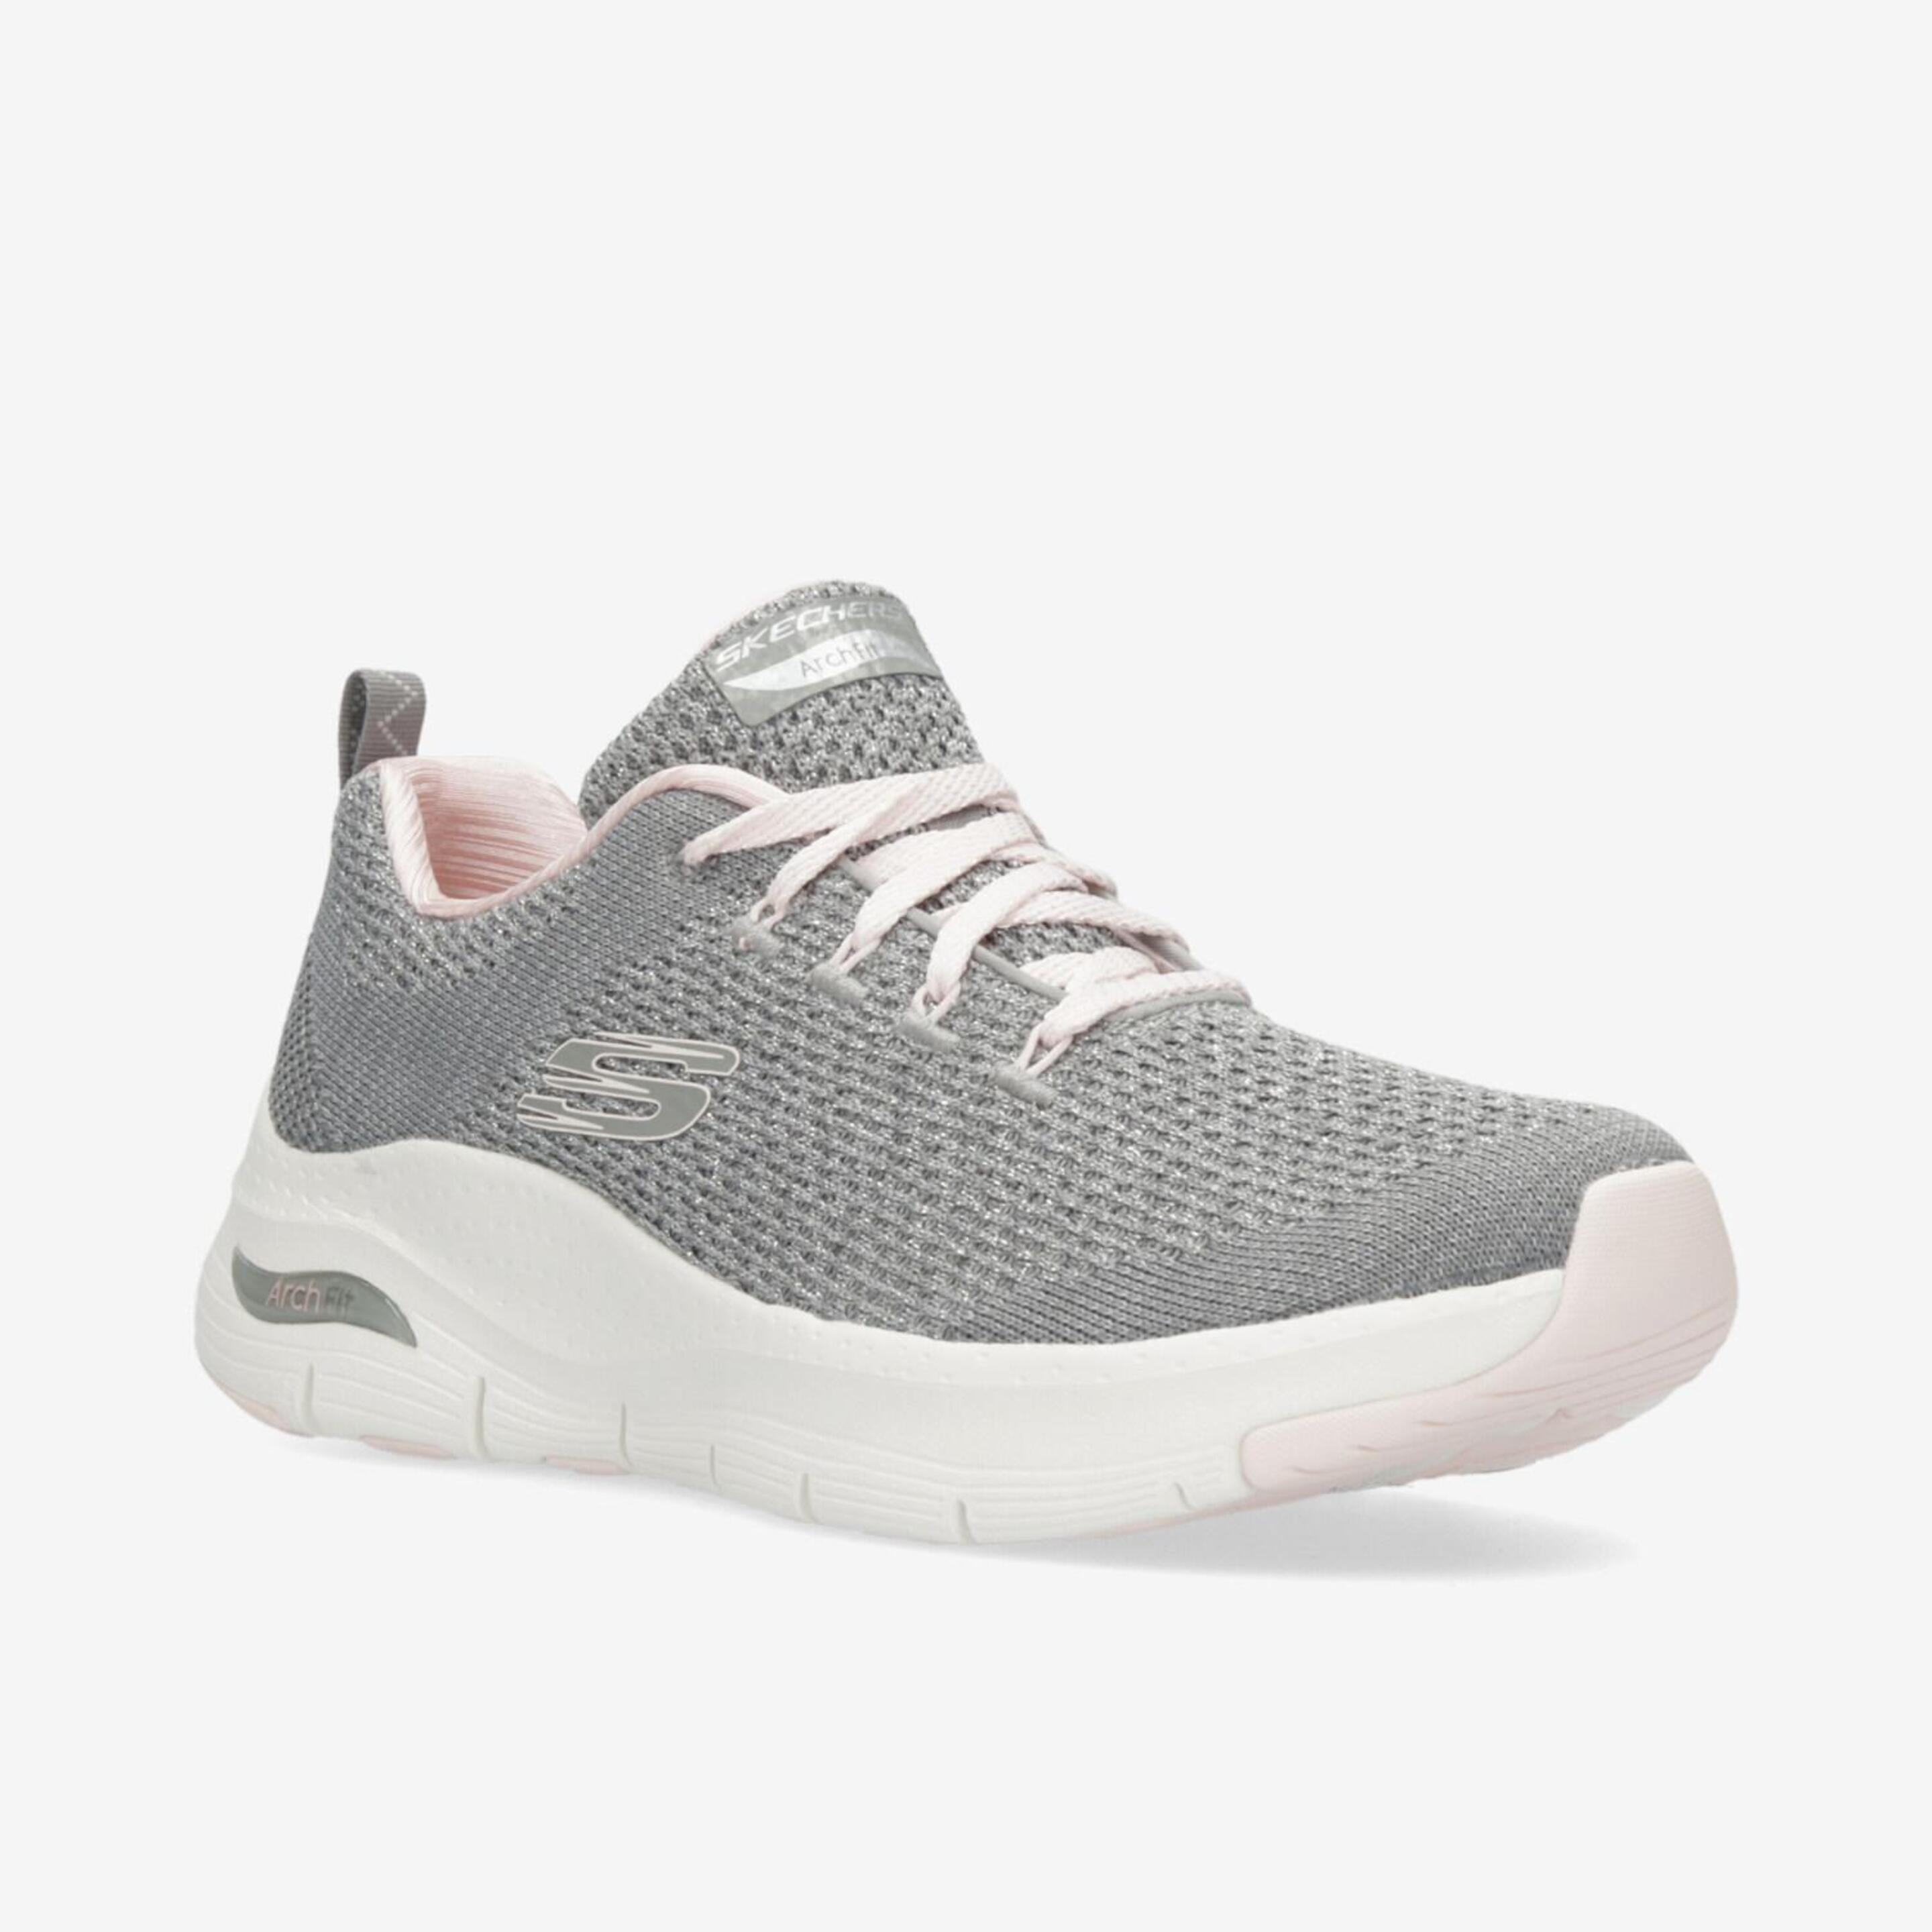 Skechers Arch Fit Infinite - Gris - Zapatillas Running Mujer